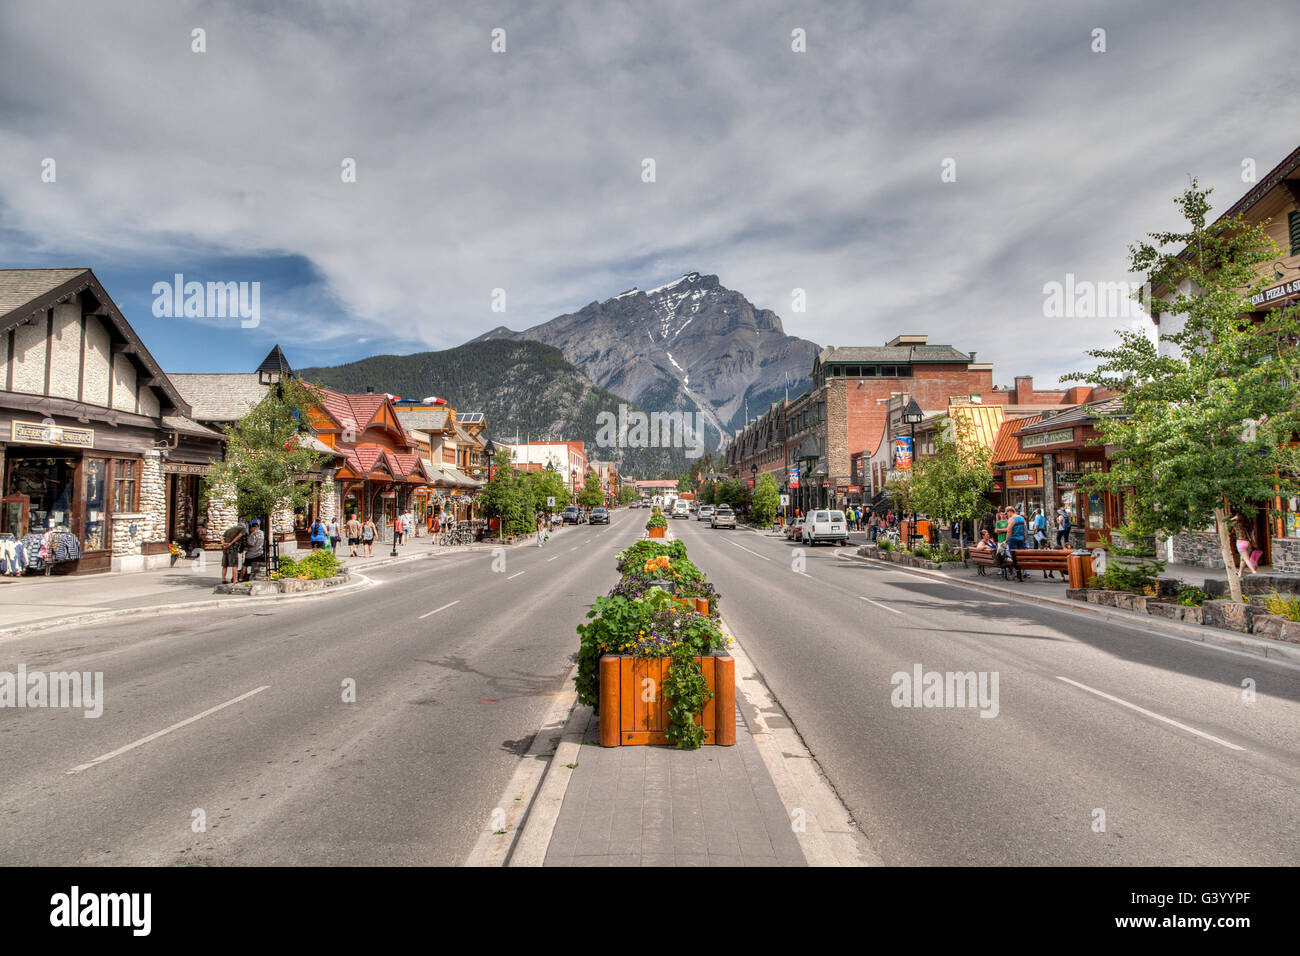 Banff, Canada - July 3, 2014: Shoppers stroll along the many retail shops along Banff Avenue in the Banff National Park. The tow Stock Photo